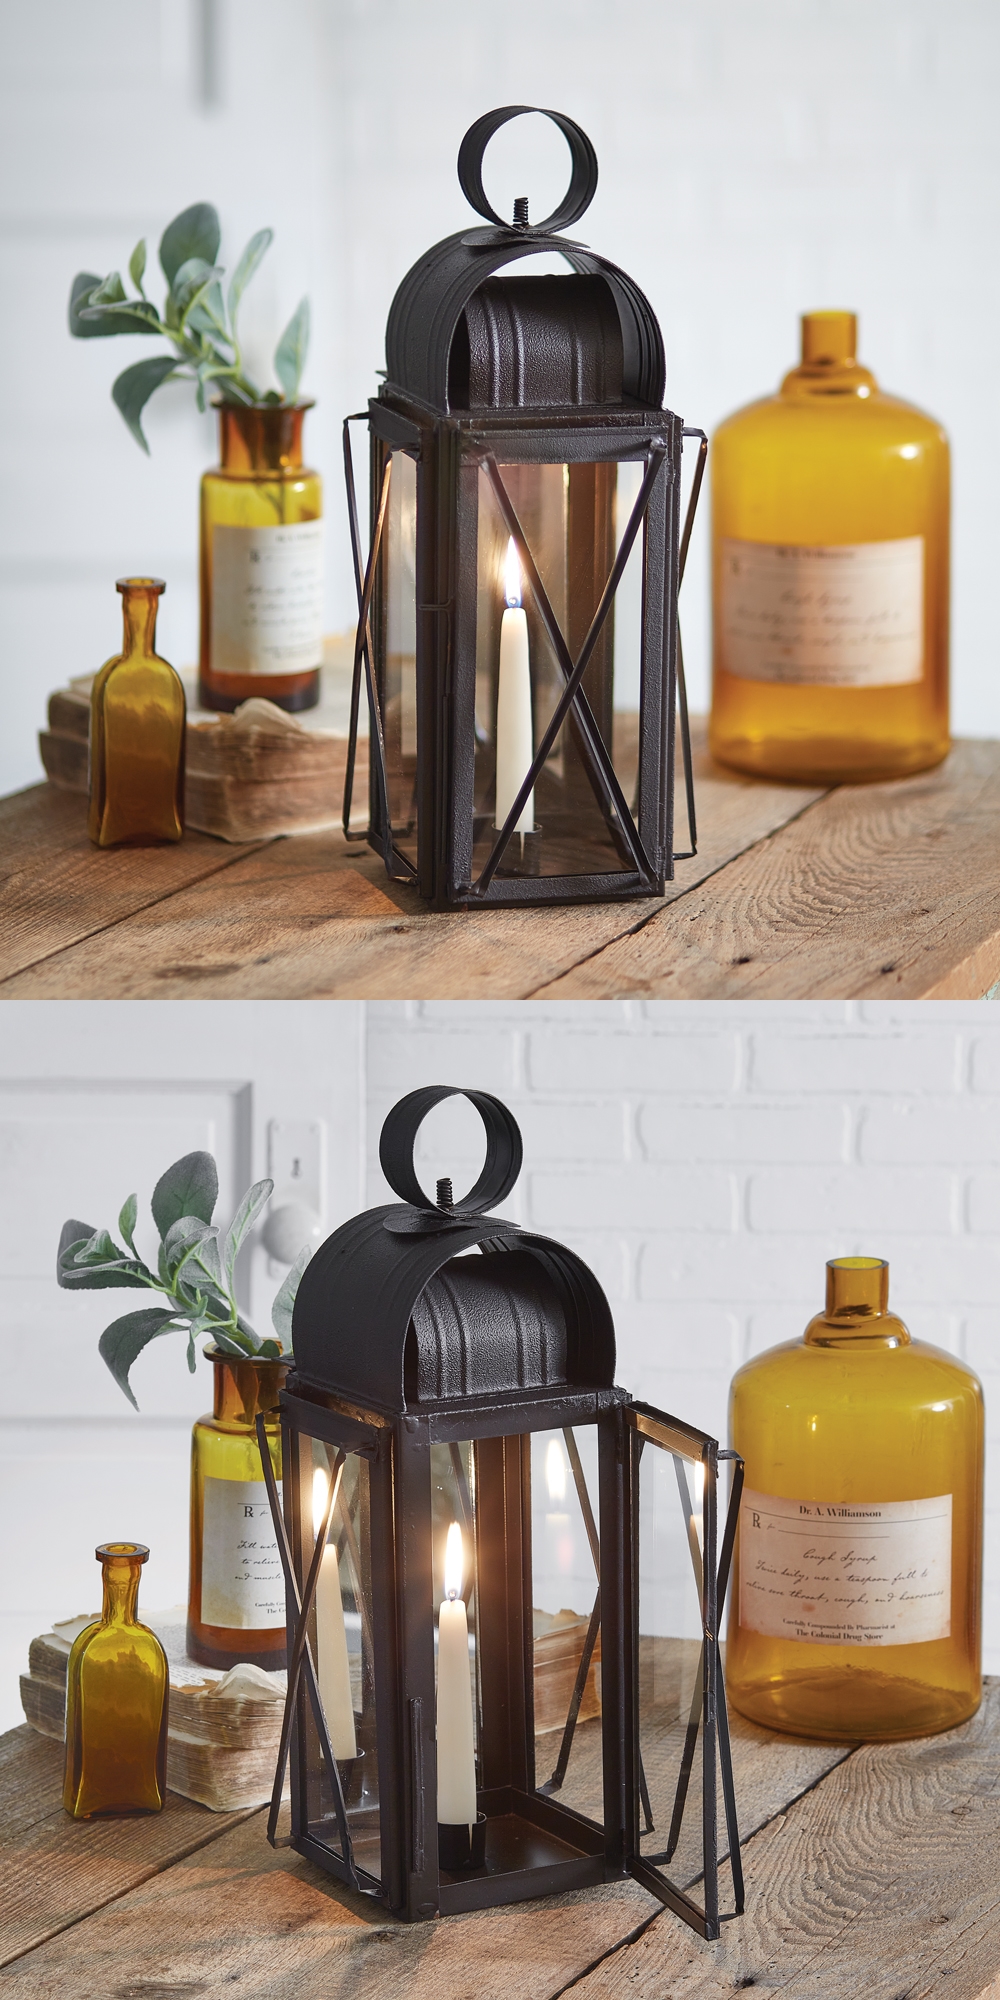 CTW Home Collection Mirrored-Back Metal-and-Glass Milkhouse Lantern